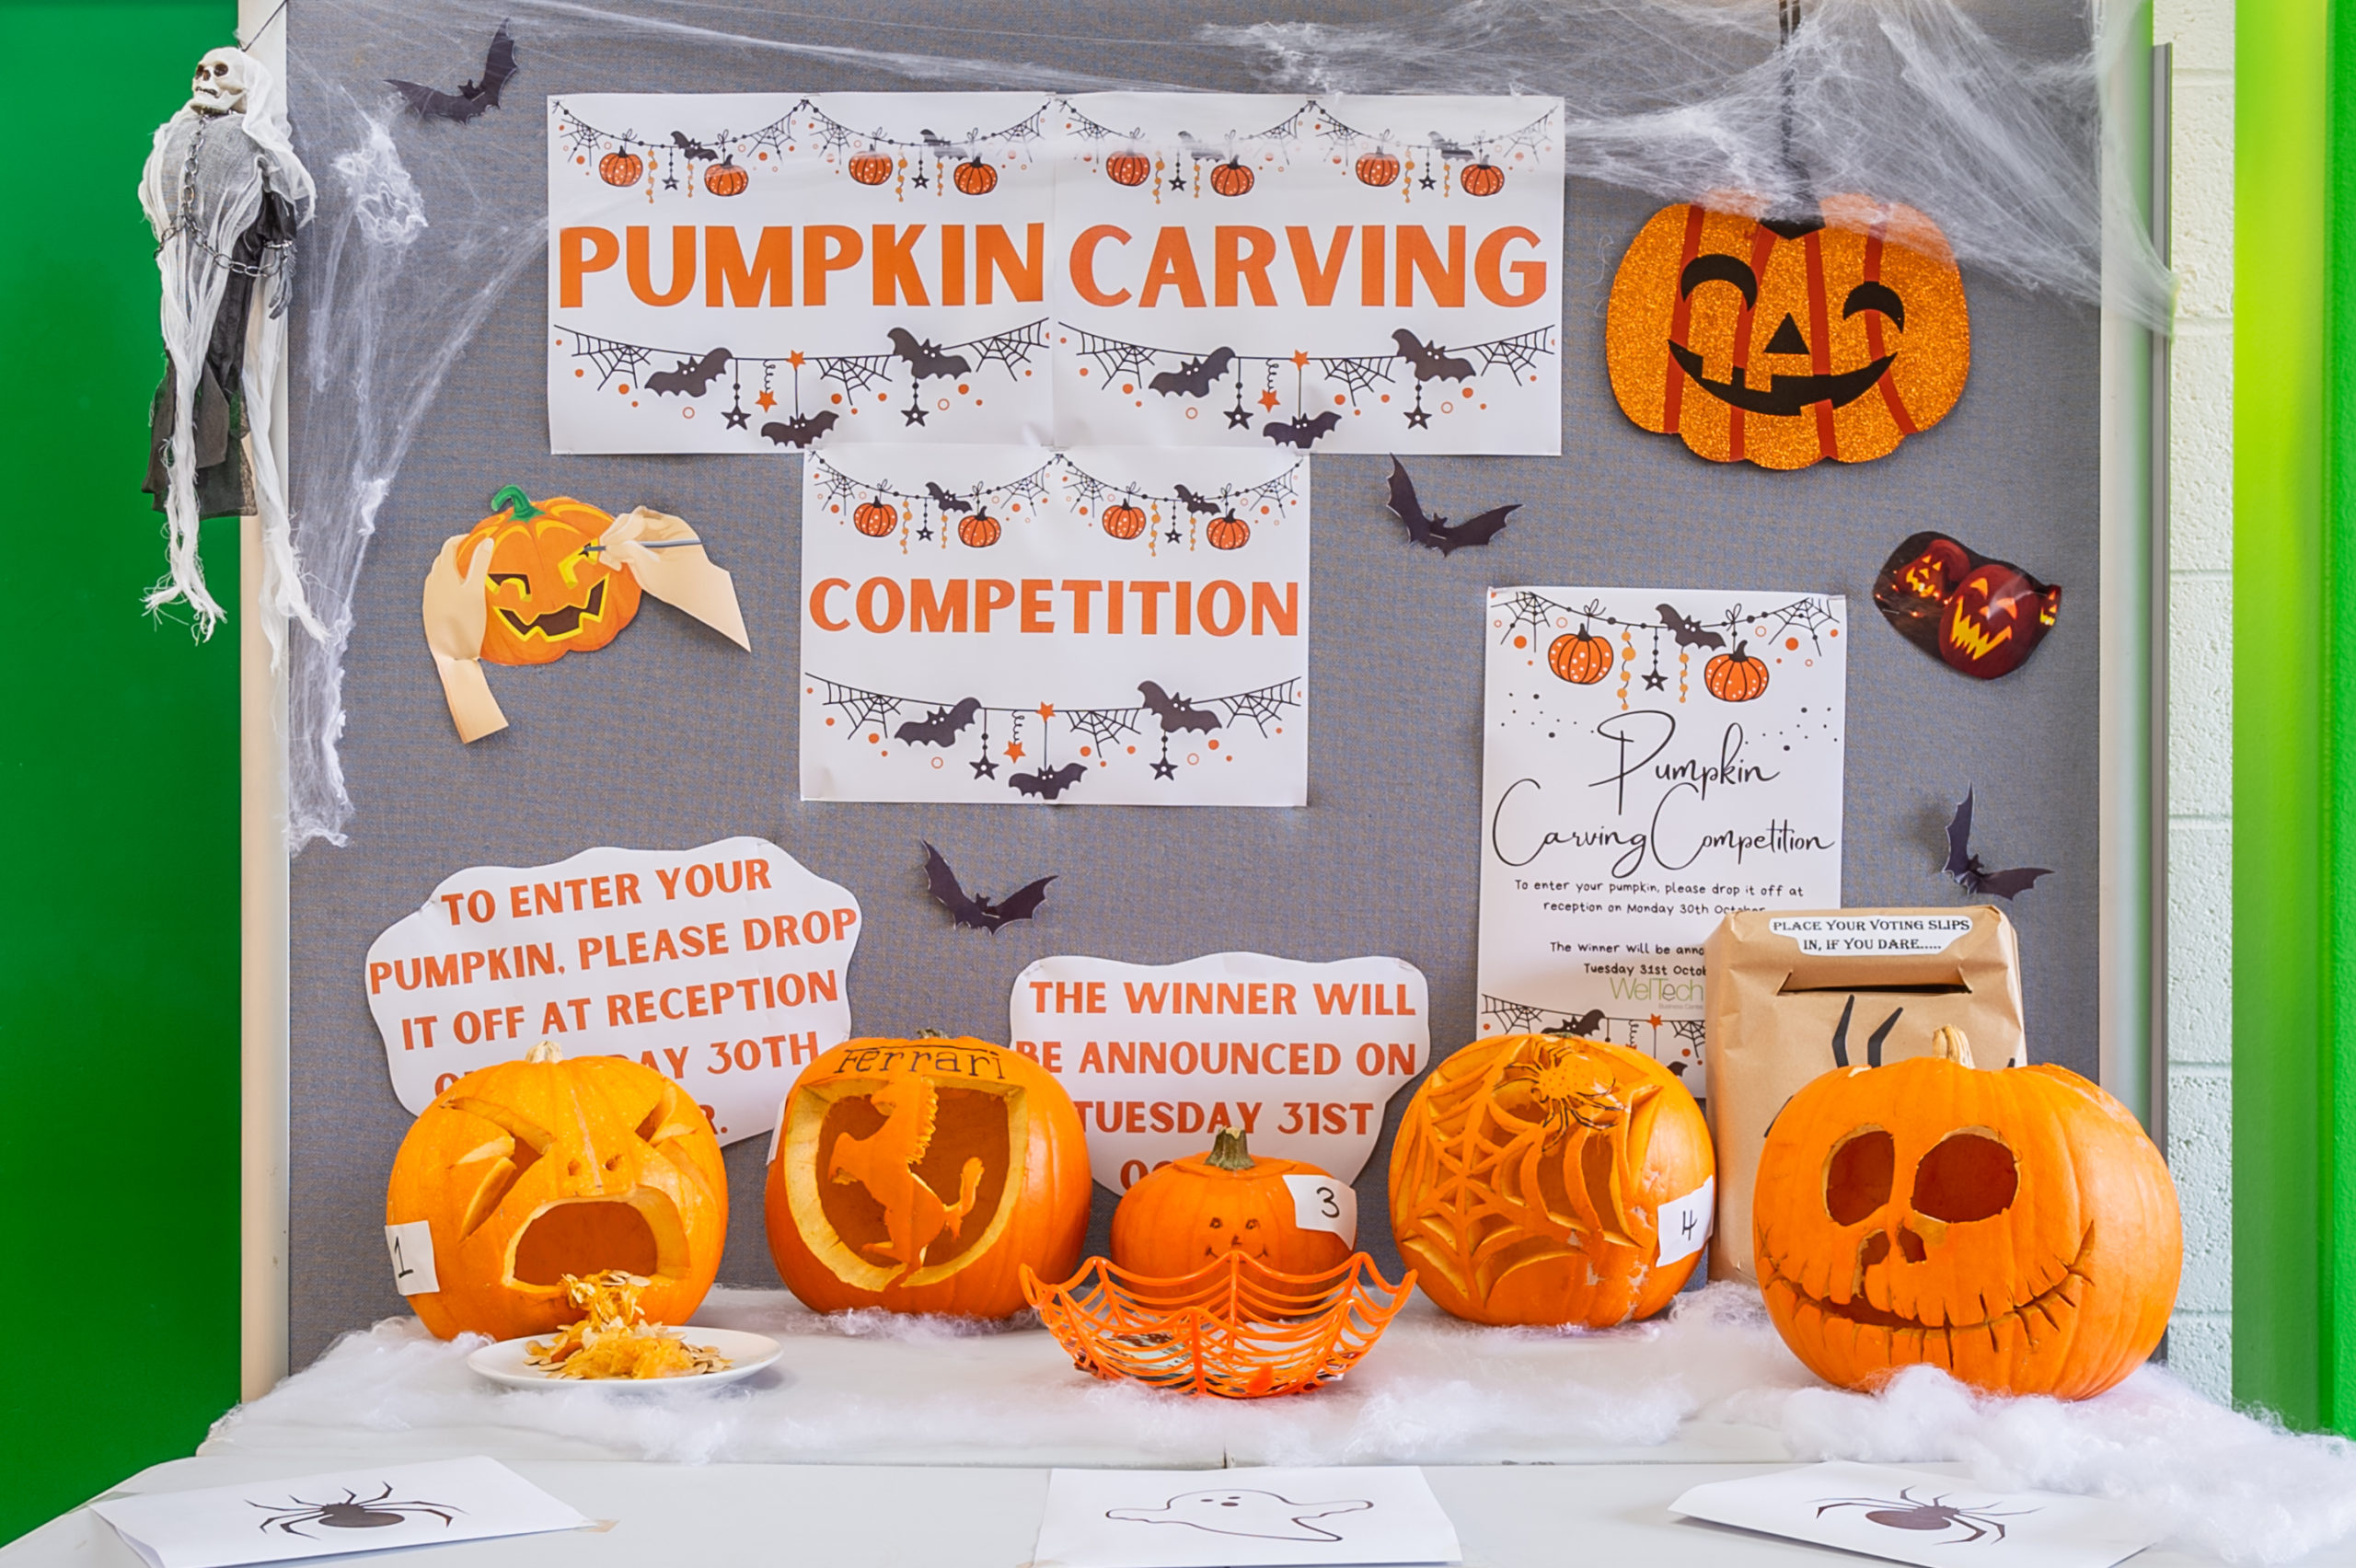 Pumpkin carving competition photo